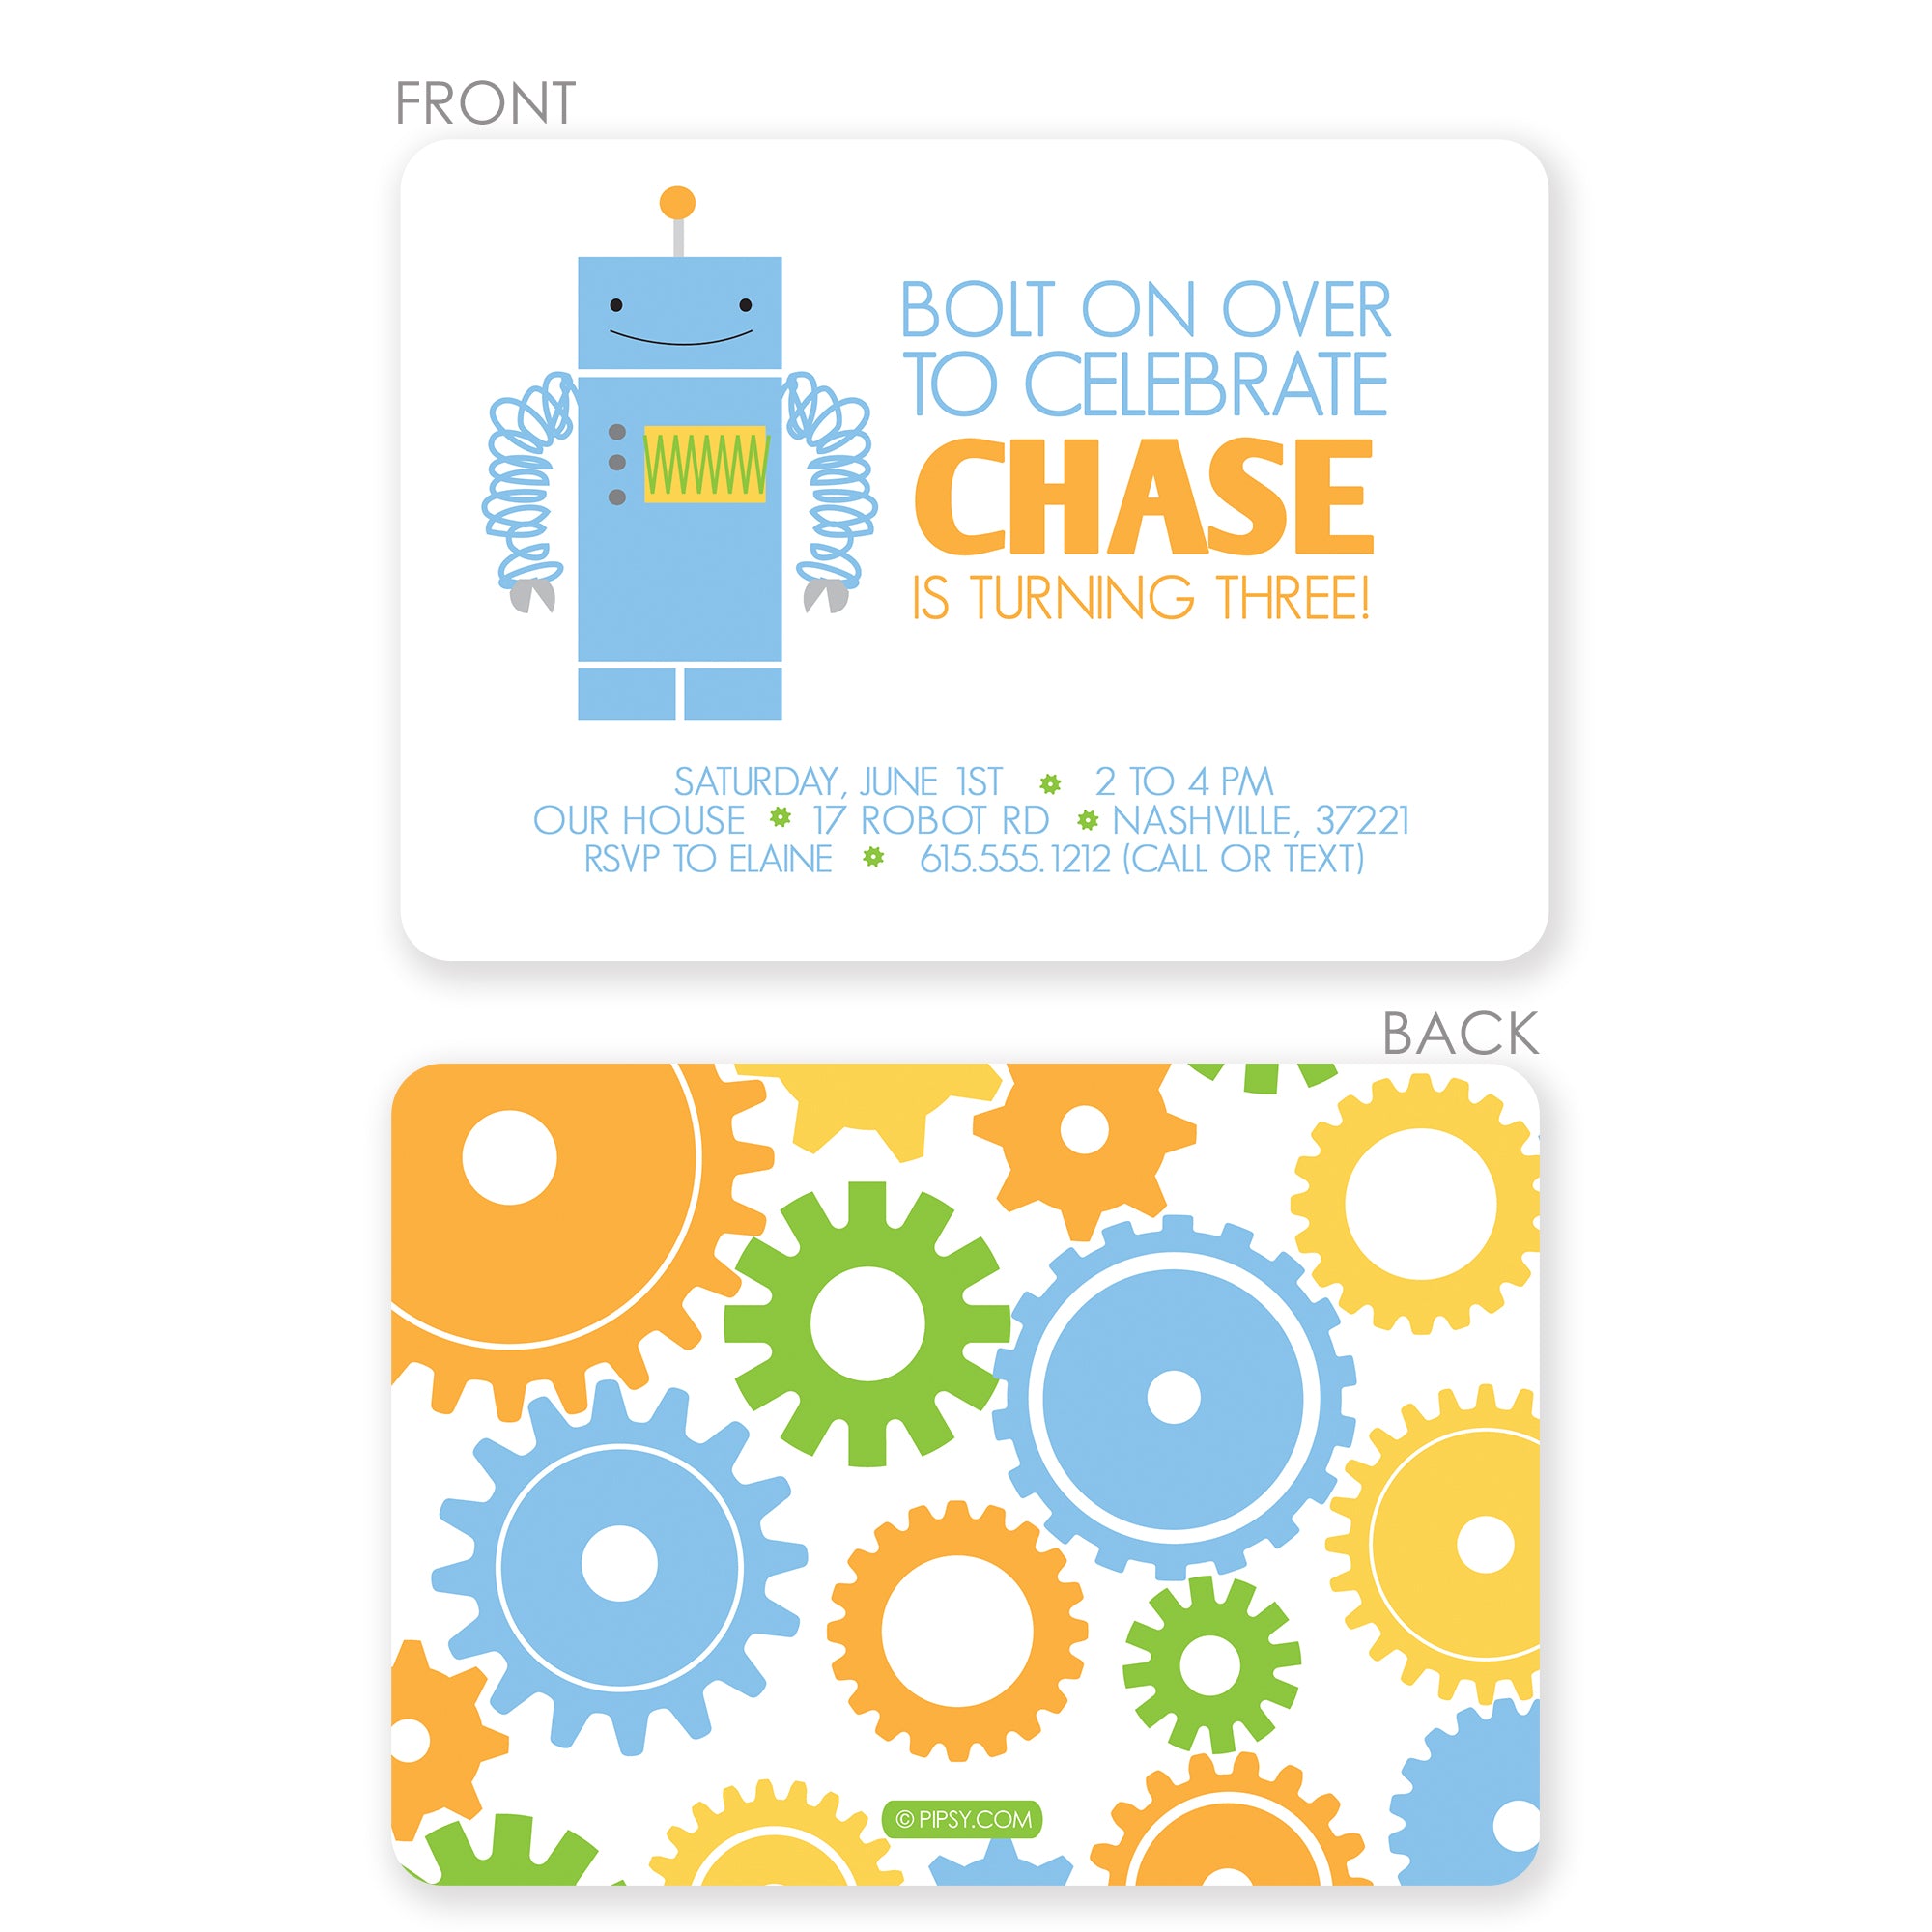 Robot birthday invitation with a gear pattern on the back, printed on thick cardstock with 2 sided printing, envelopes included. Can be made in any color scheme